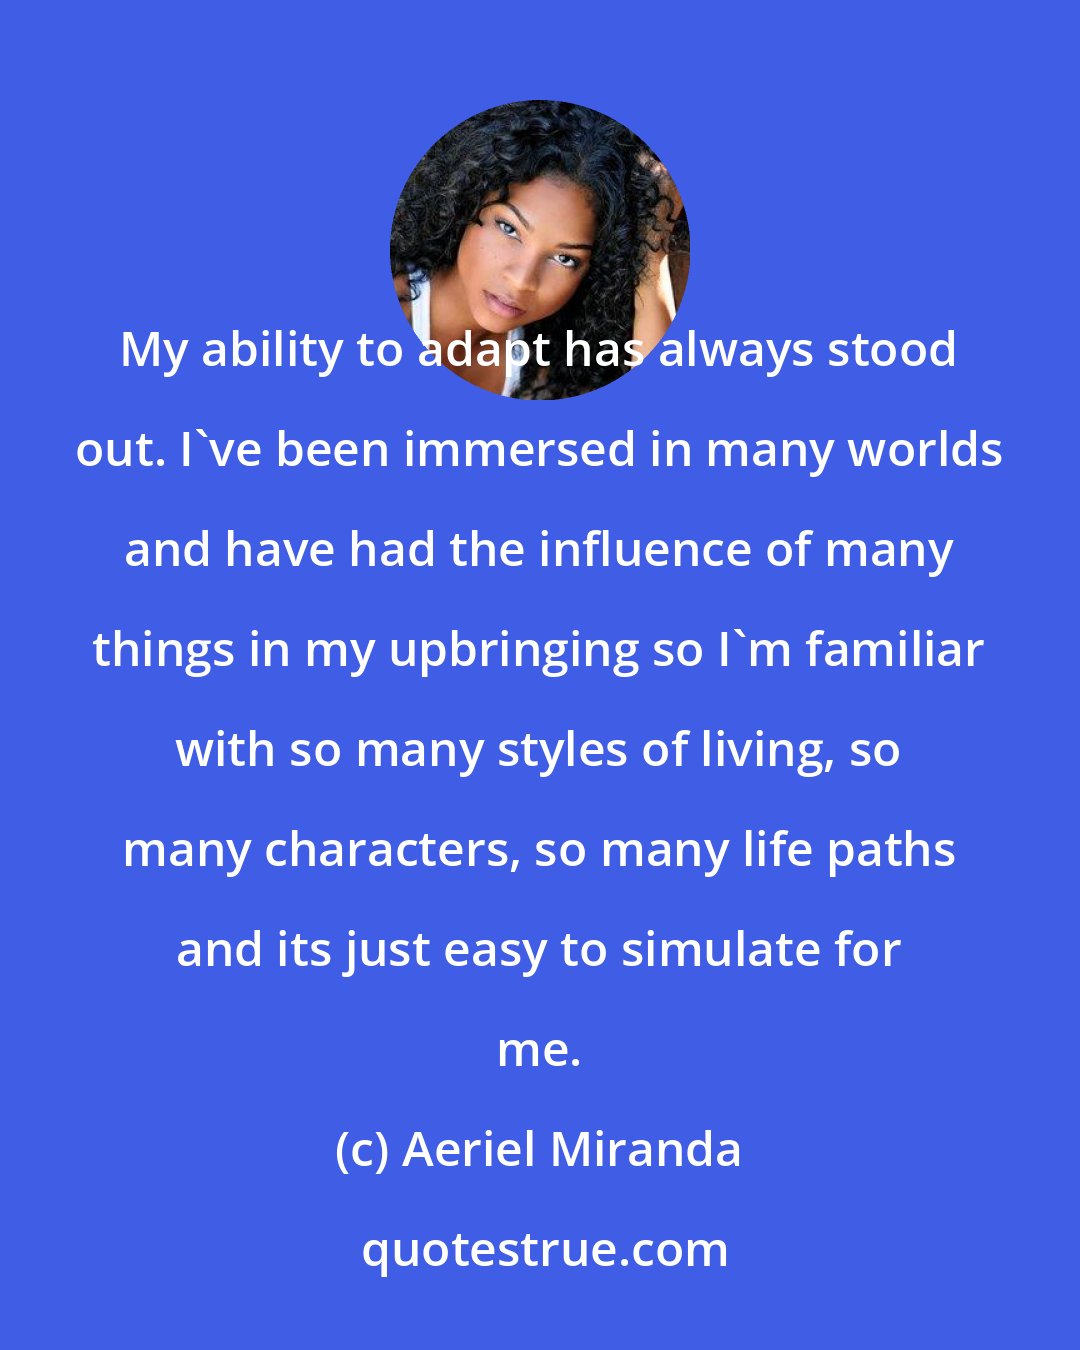 Aeriel Miranda: My ability to adapt has always stood out. I've been immersed in many worlds and have had the influence of many things in my upbringing so I'm familiar with so many styles of living, so many characters, so many life paths and its just easy to simulate for me.